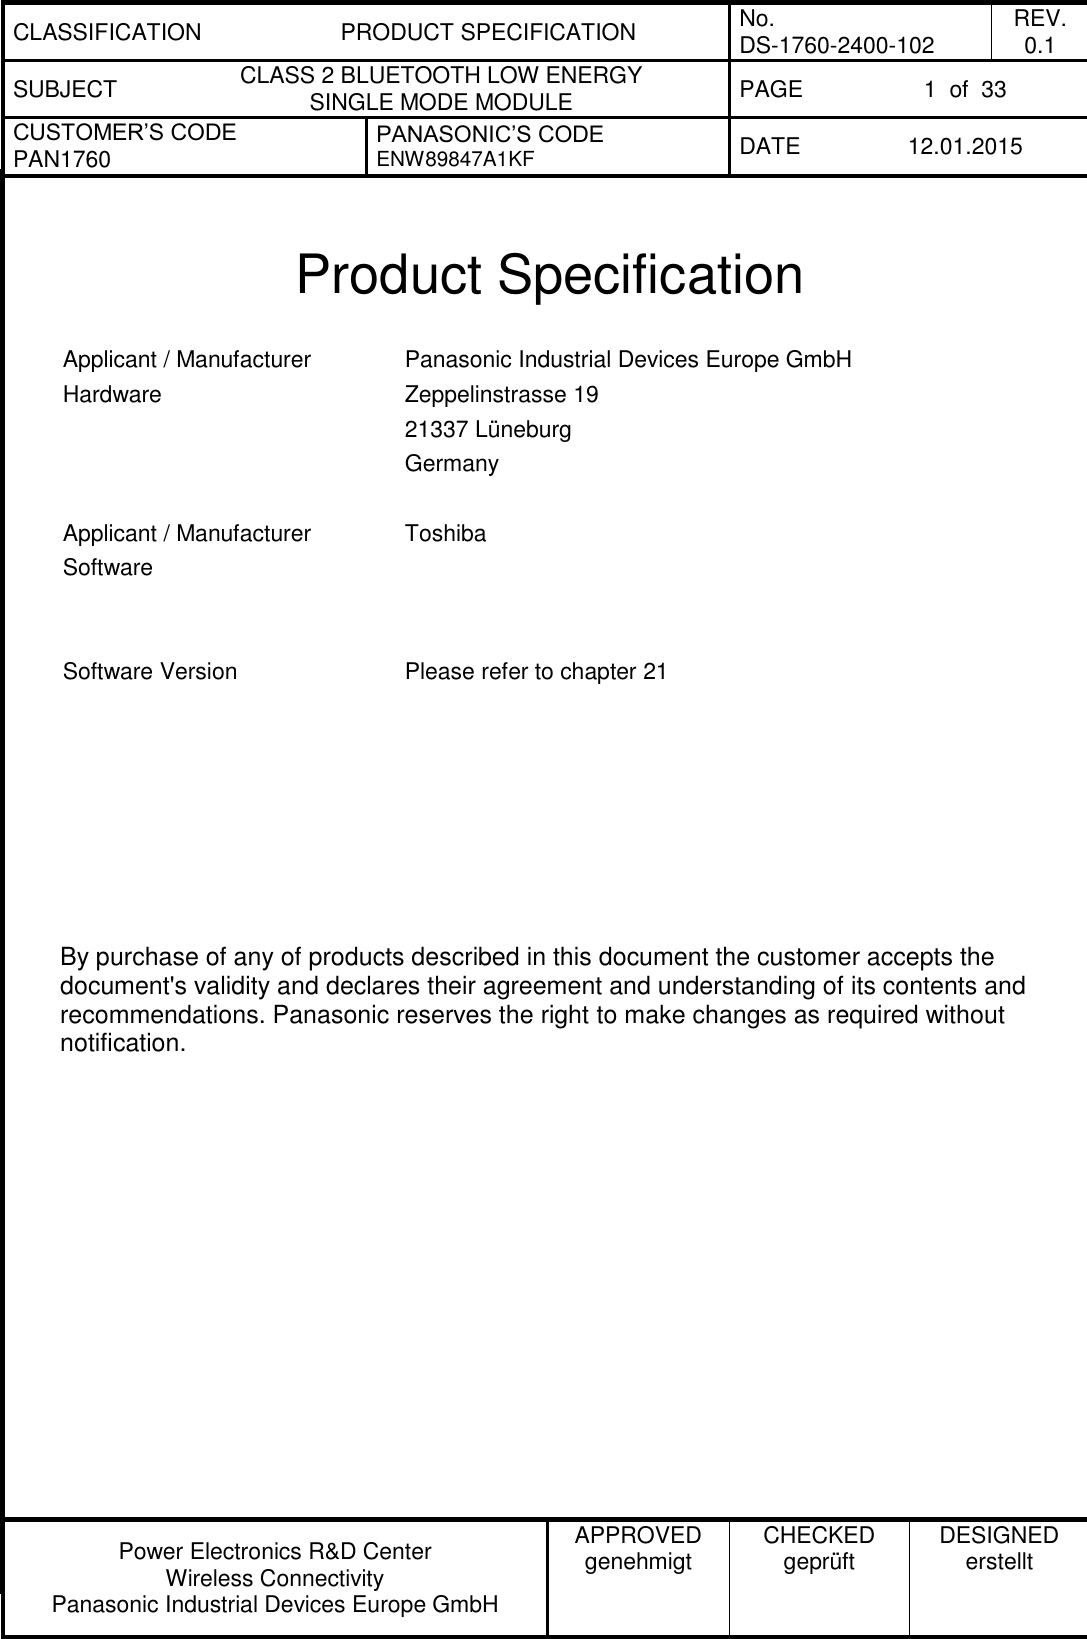 CLASSIFICATION PRODUCT SPECIFICATION No. DS-1760-2400-102 REV. 0.1 SUBJECT CLASS 2 BLUETOOTH LOW ENERGY  SINGLE MODE MODULE PAGE 1  of  33 CUSTOMER’S CODE PAN1760 PANASONIC’S CODE ENW89847A1KF  DATE 12.01.2015   Power Electronics R&amp;D Center Wireless Connectivity Panasonic Industrial Devices Europe GmbH APPROVED genehmigt CHECKED geprüft DESIGNED erstellt   Product Specification  Applicant / Manufacturer Hardware Panasonic Industrial Devices Europe GmbH Zeppelinstrasse 19 21337 Lüneburg Germany   Applicant / Manufacturer Software Toshiba    Software Version Please refer to chapter 21            By purchase of any of products described in this document the customer accepts the document&apos;s validity and declares their agreement and understanding of its contents and recommendations. Panasonic reserves the right to make changes as required without notification. 